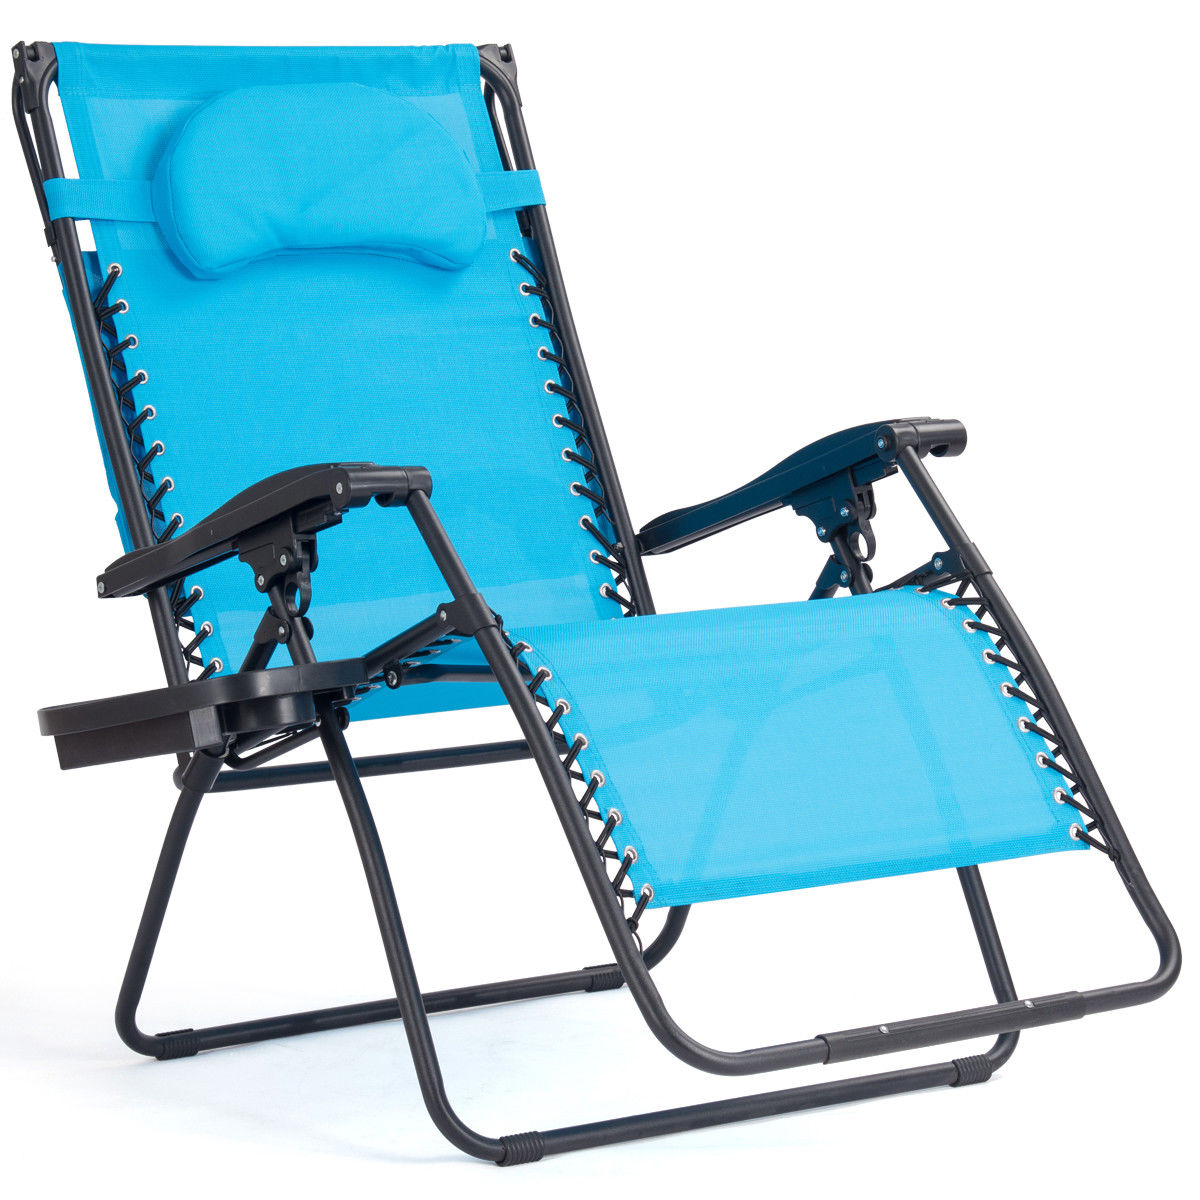 Gymax Folding Recliner Zero Gravity Lounge Chair W/ Shade Canopy Cup Holder Blue - image 4 of 10